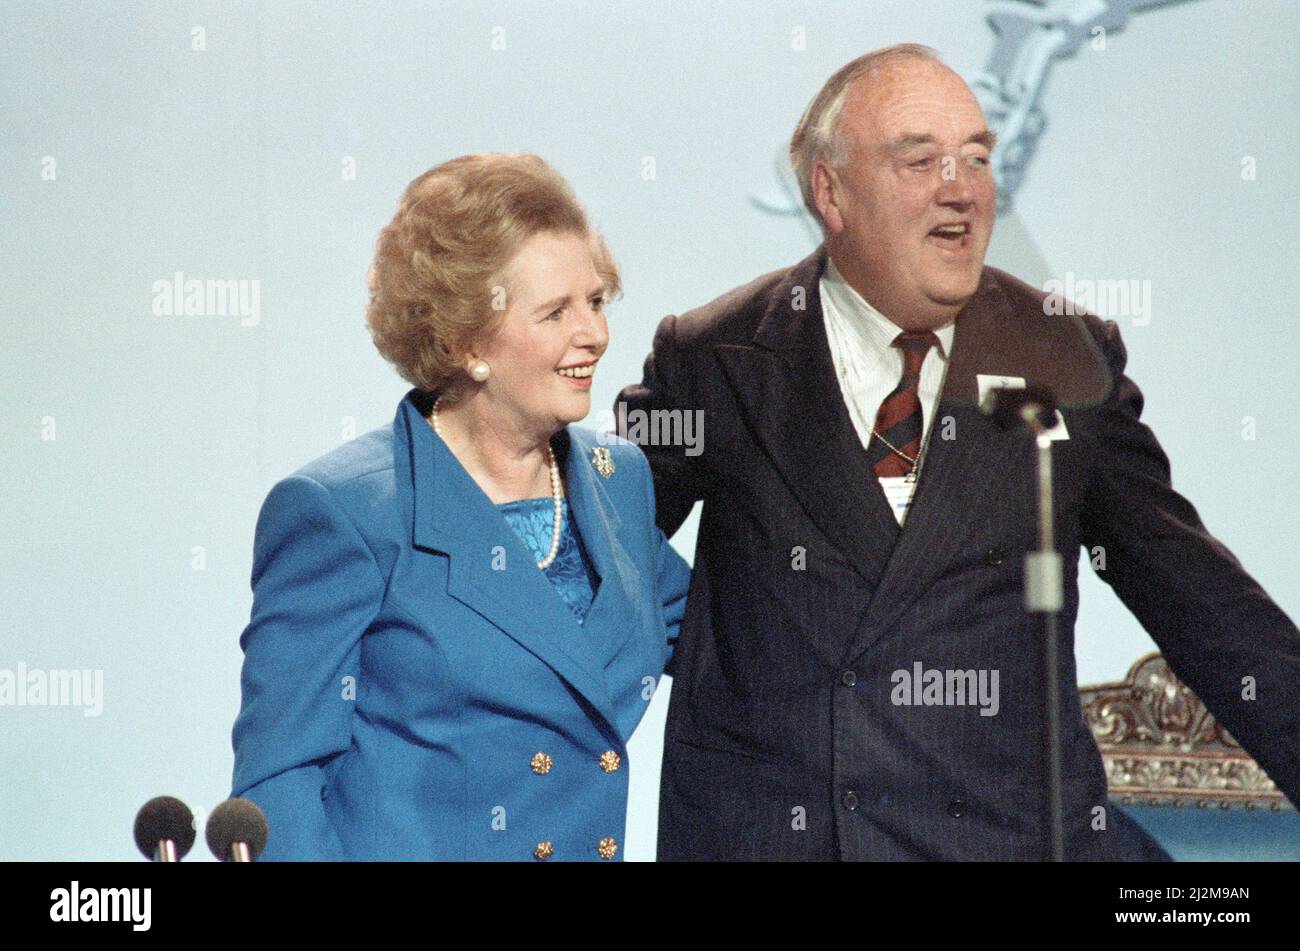 The Conservative Party Conference, Blackpool. Prime Minister Margaret Thatcher with Willie Whitelaw. October 1989. Stock Photo